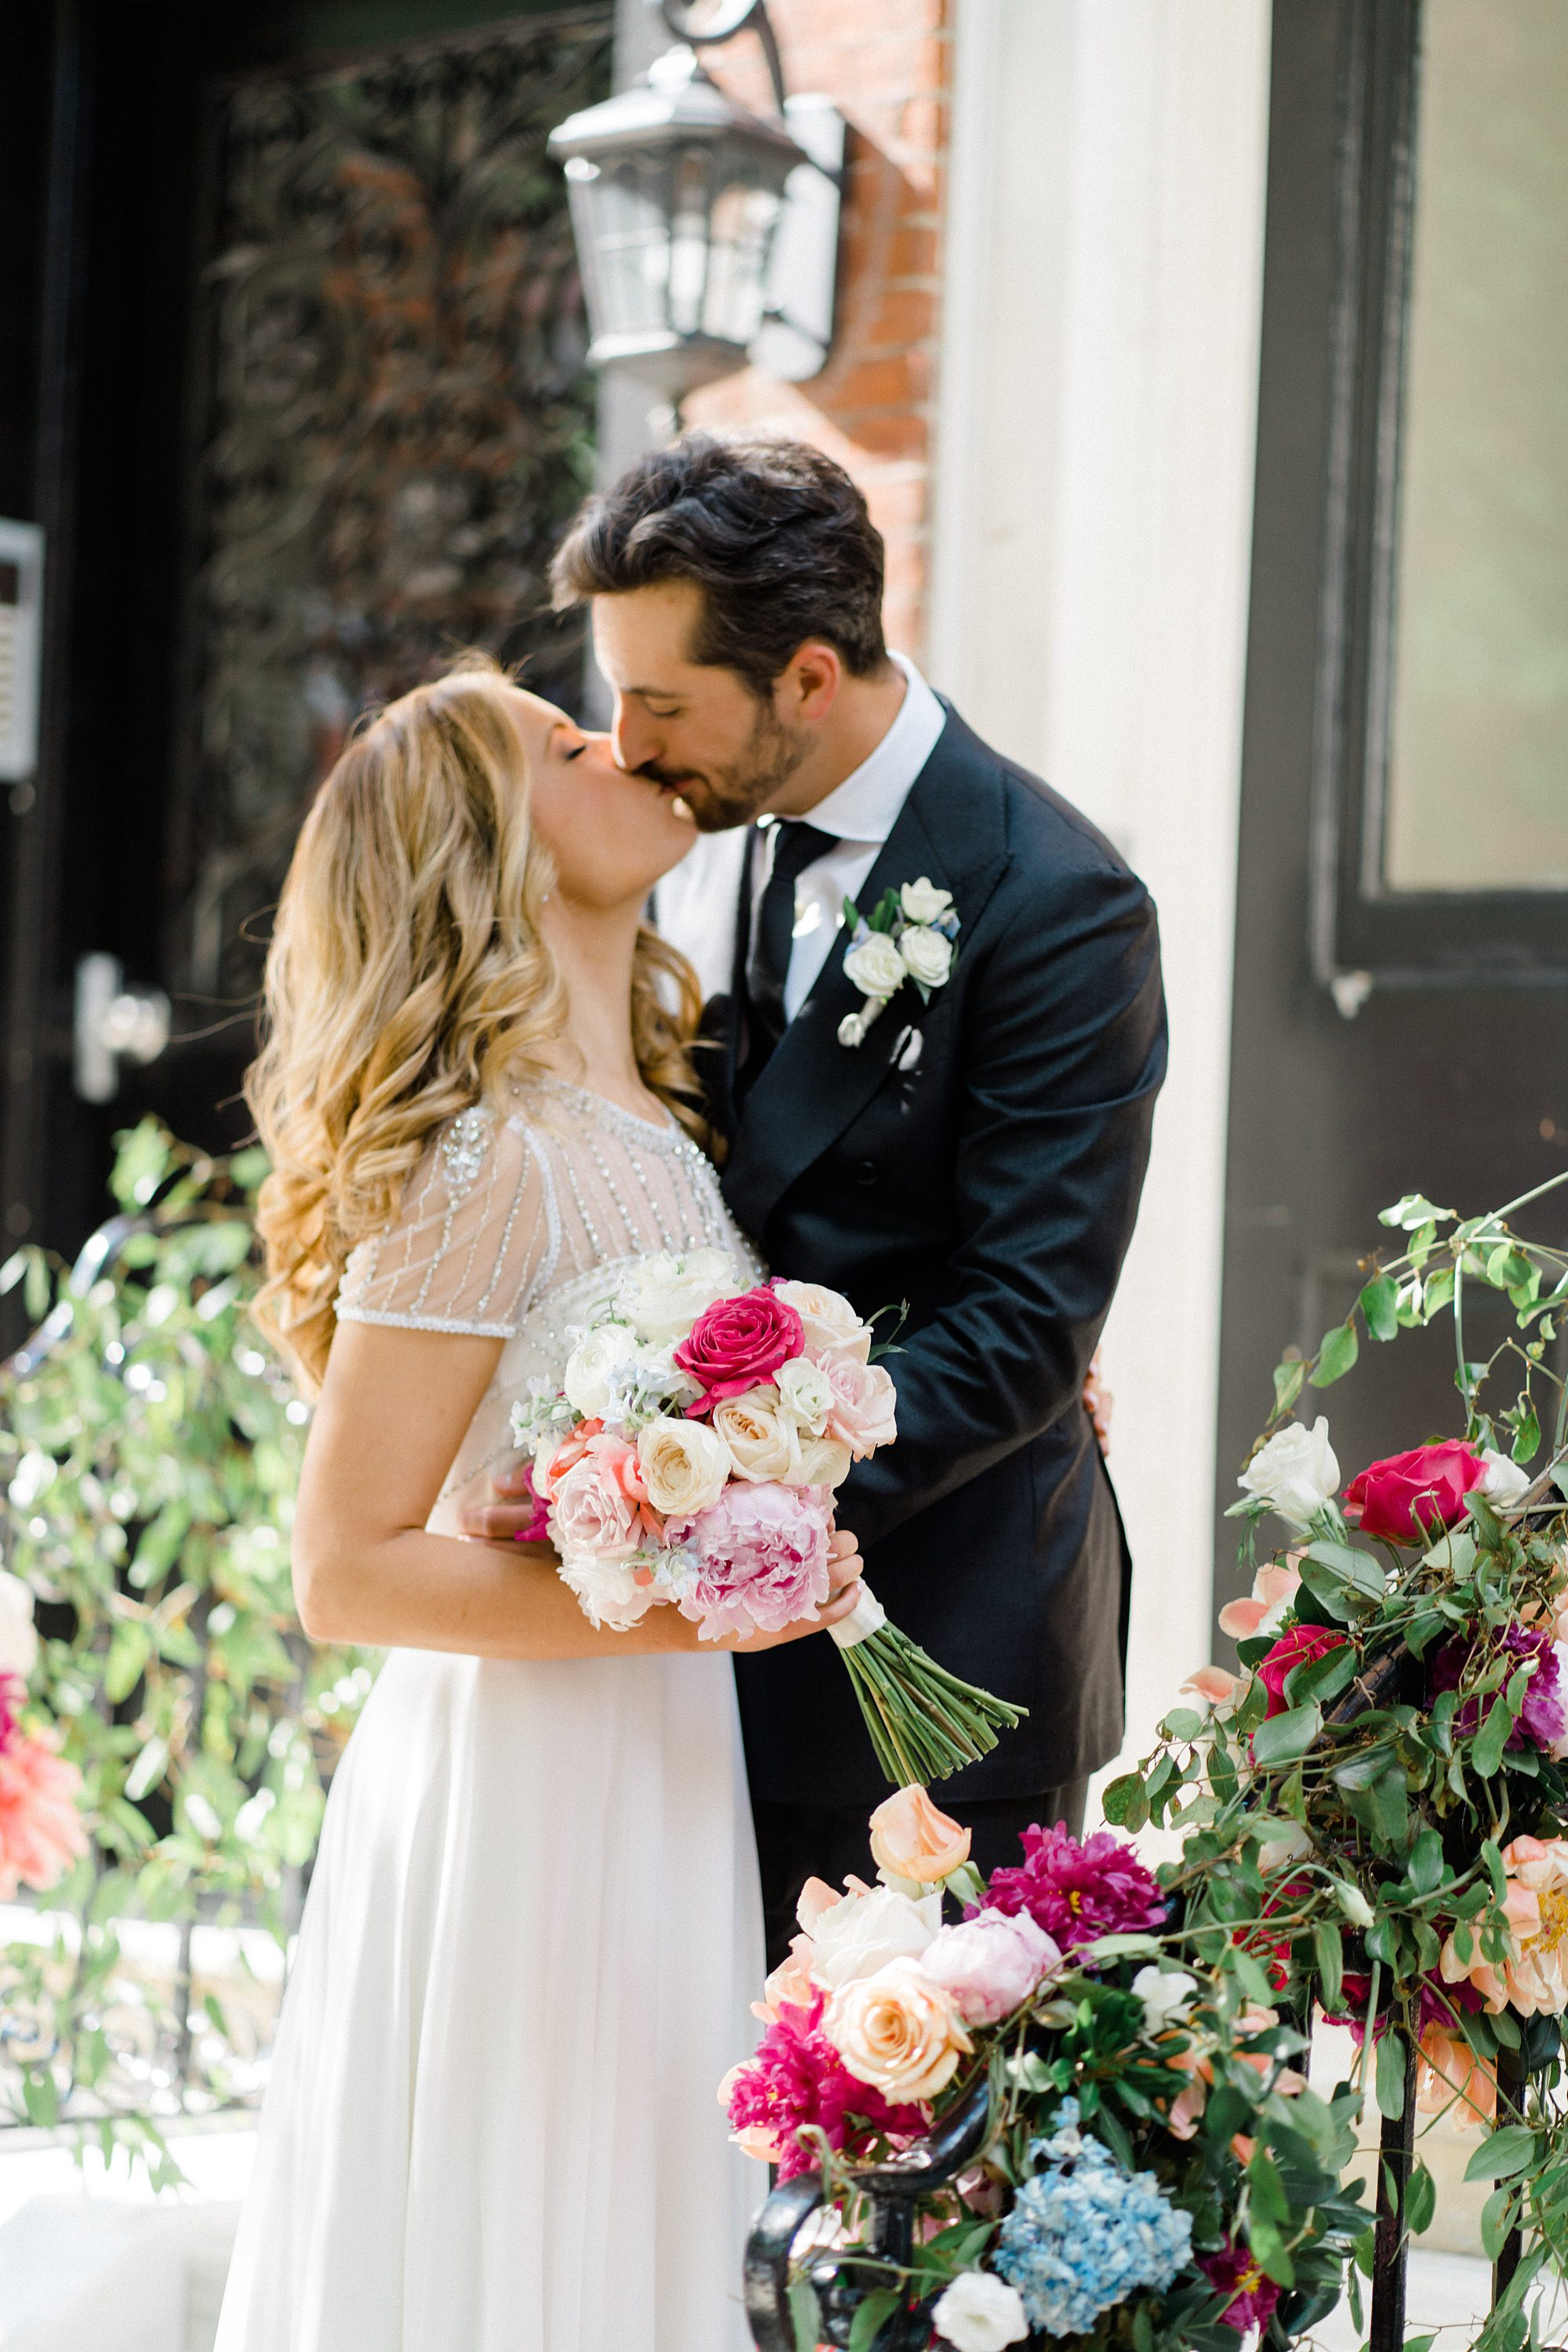 bride and groom kiss surrounded by beautiful wedding flowers outside wedding venue